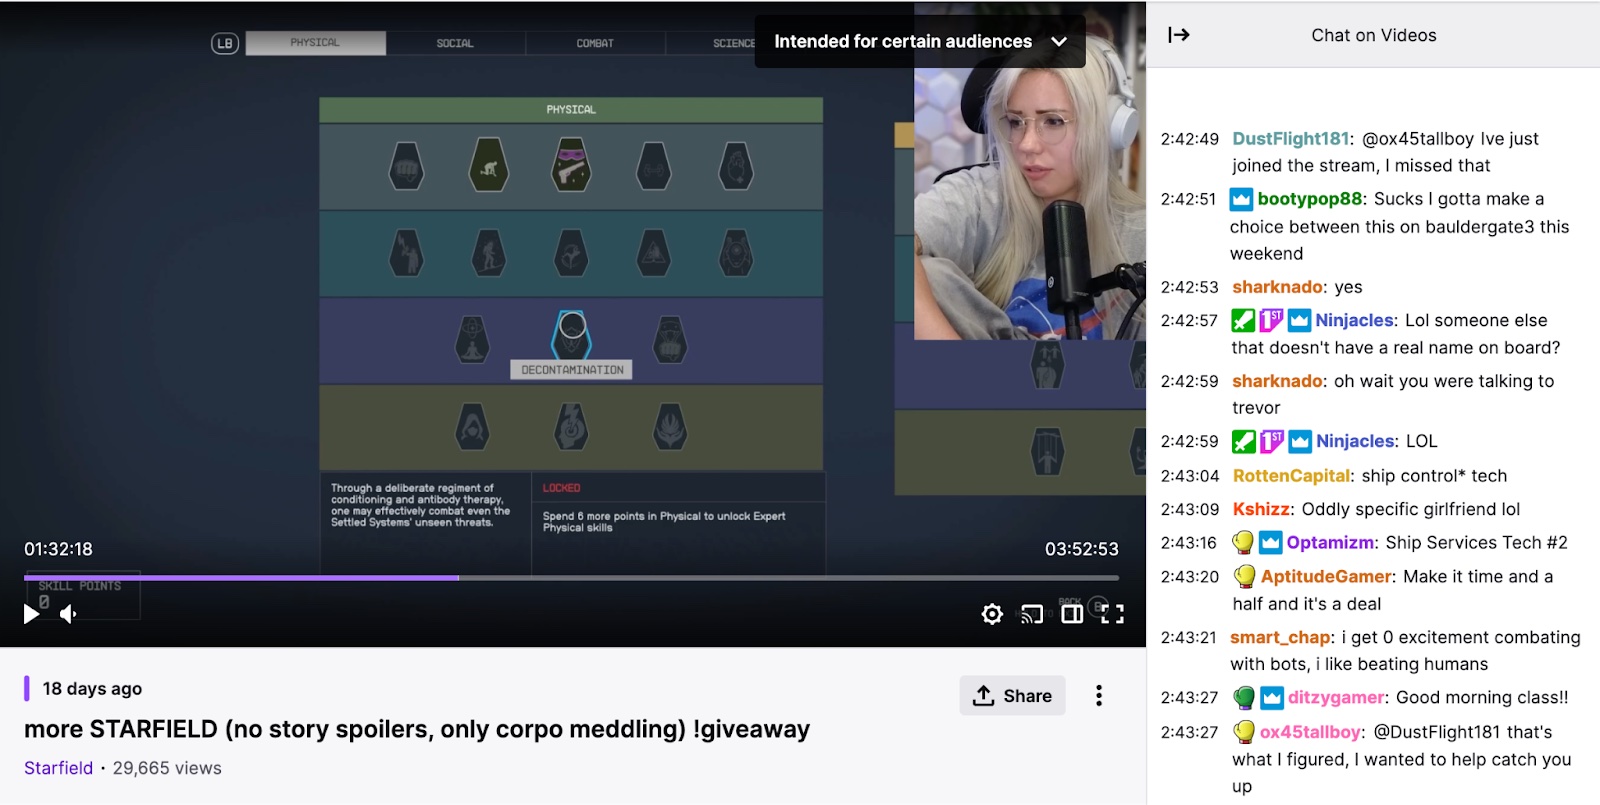 Alanah Pierce's gaming video on Twitch with chat section opened